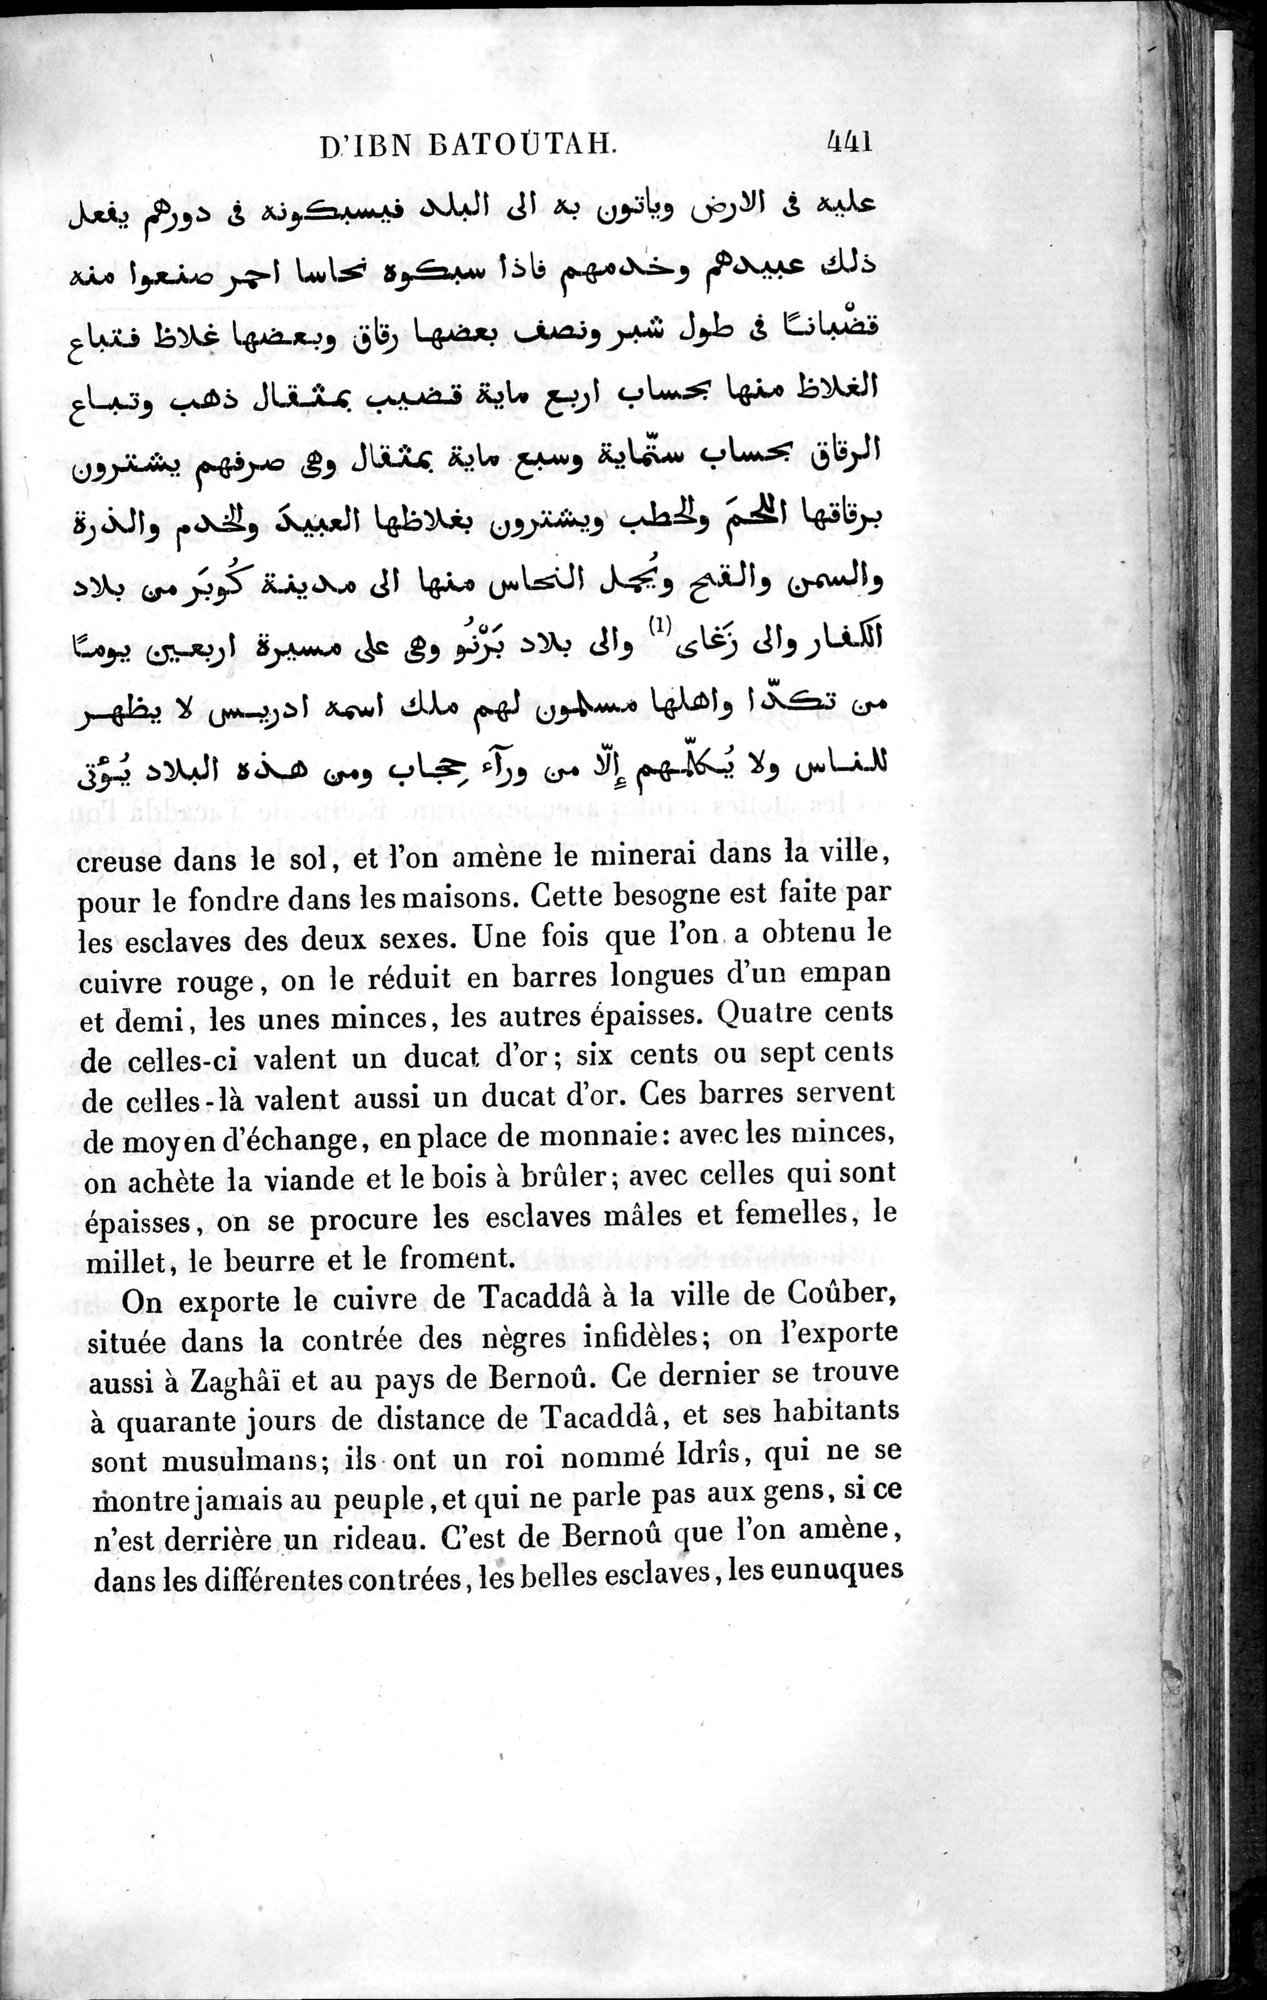 Voyages d'Ibn Batoutah : vol.4 / Page 453 (Grayscale High Resolution Image)